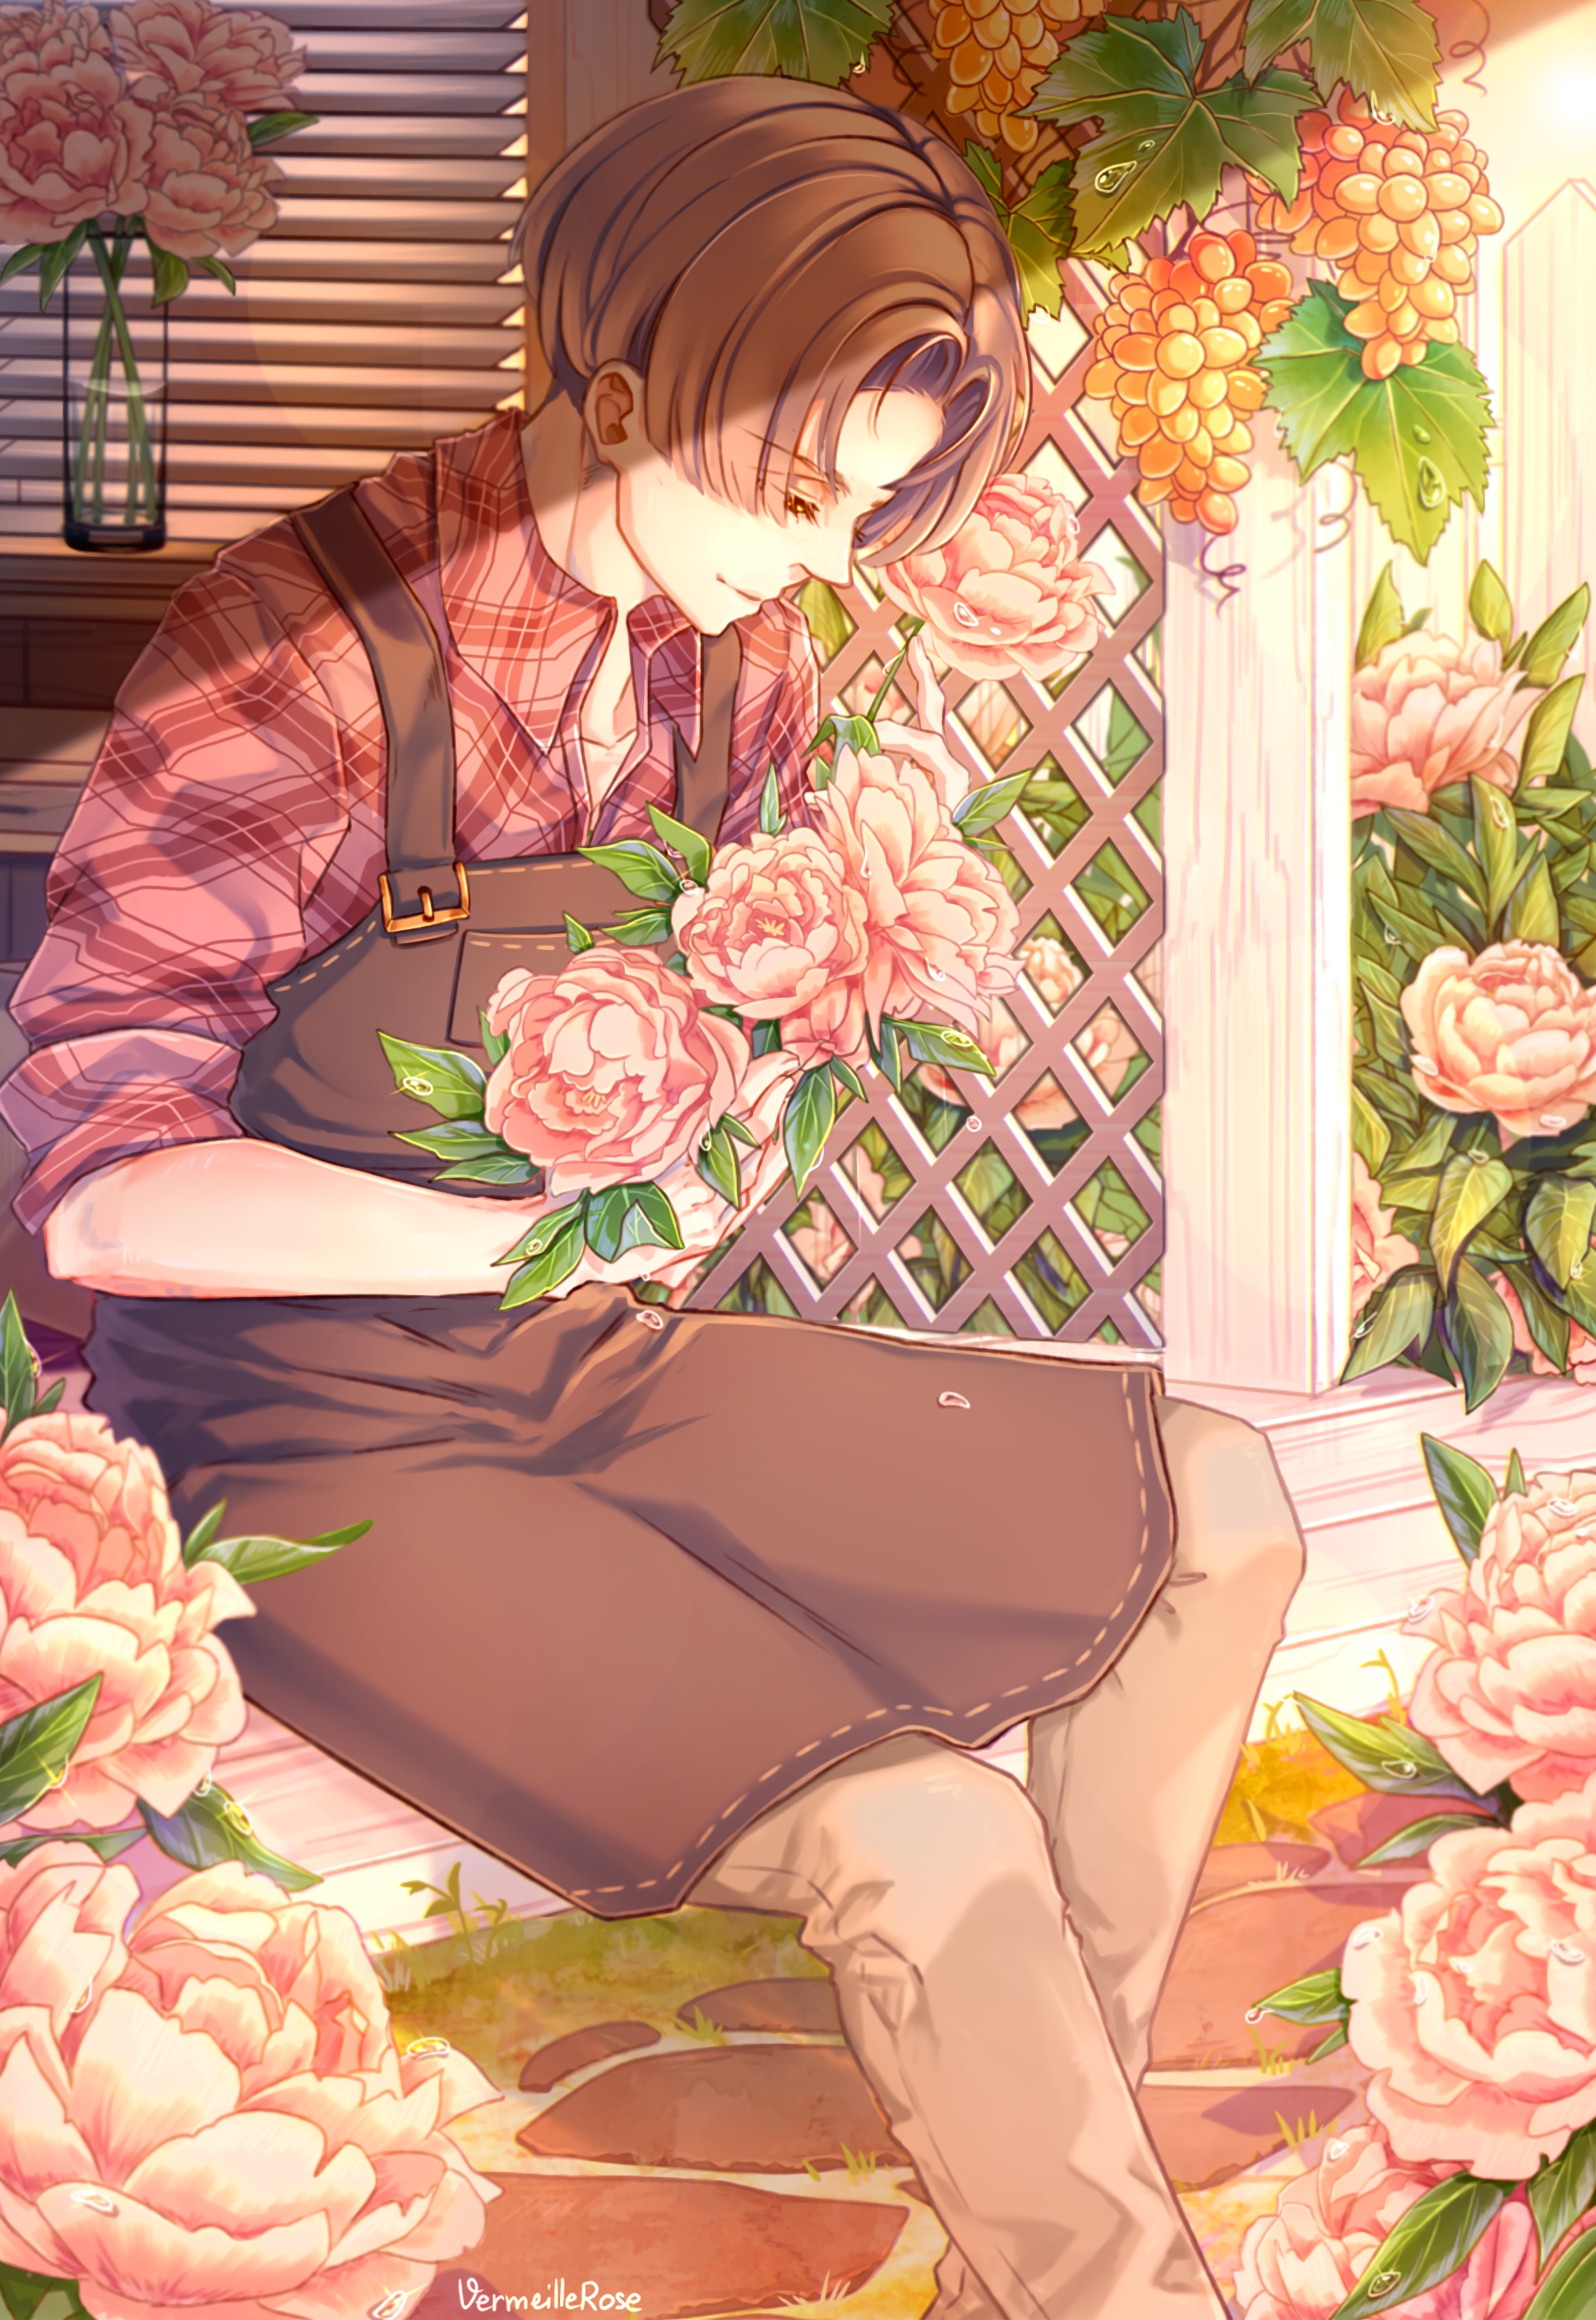 Download wallpaper 938x1668 gardener, anime, guy, flowers iphone 8/7/6s/6  for parallax hd background | Anime, Peach wallpaper, Wallpaper